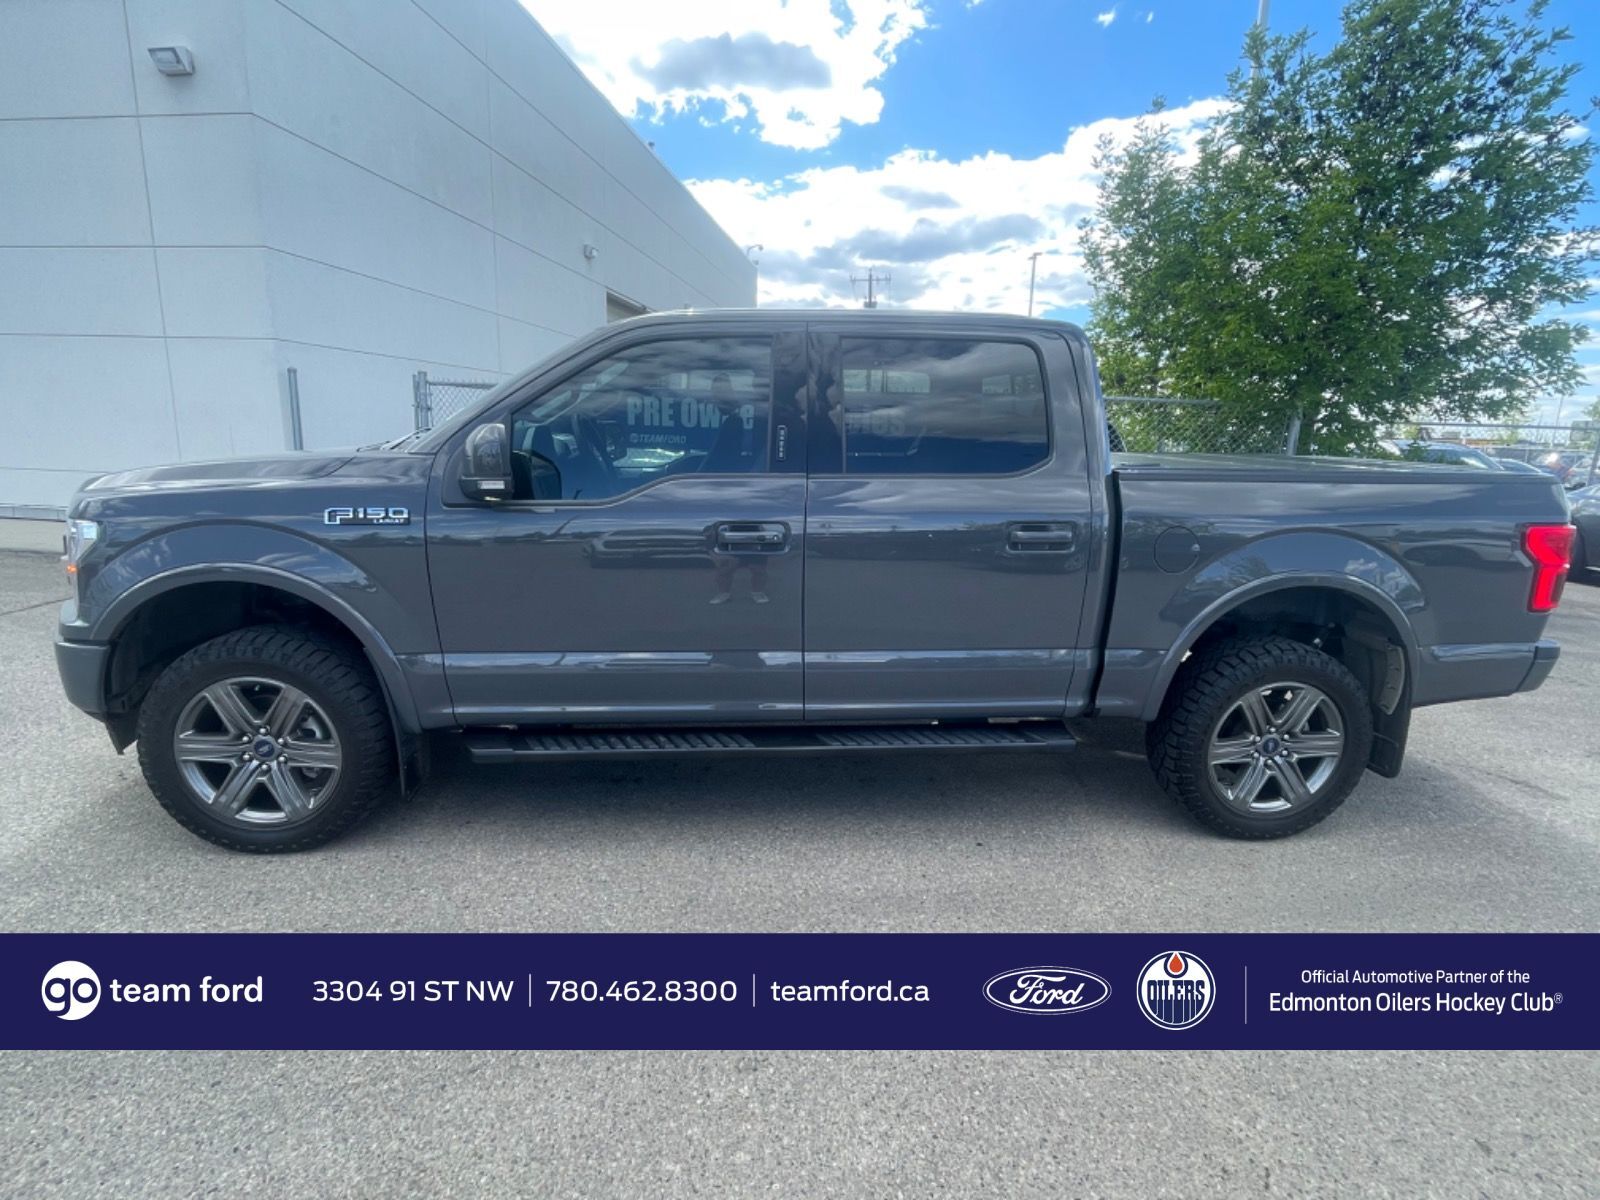 2020 Ford F-150 2.7L ECOBOOST ENG, LARIAT, TWIN MOONROOF, TRAILER 